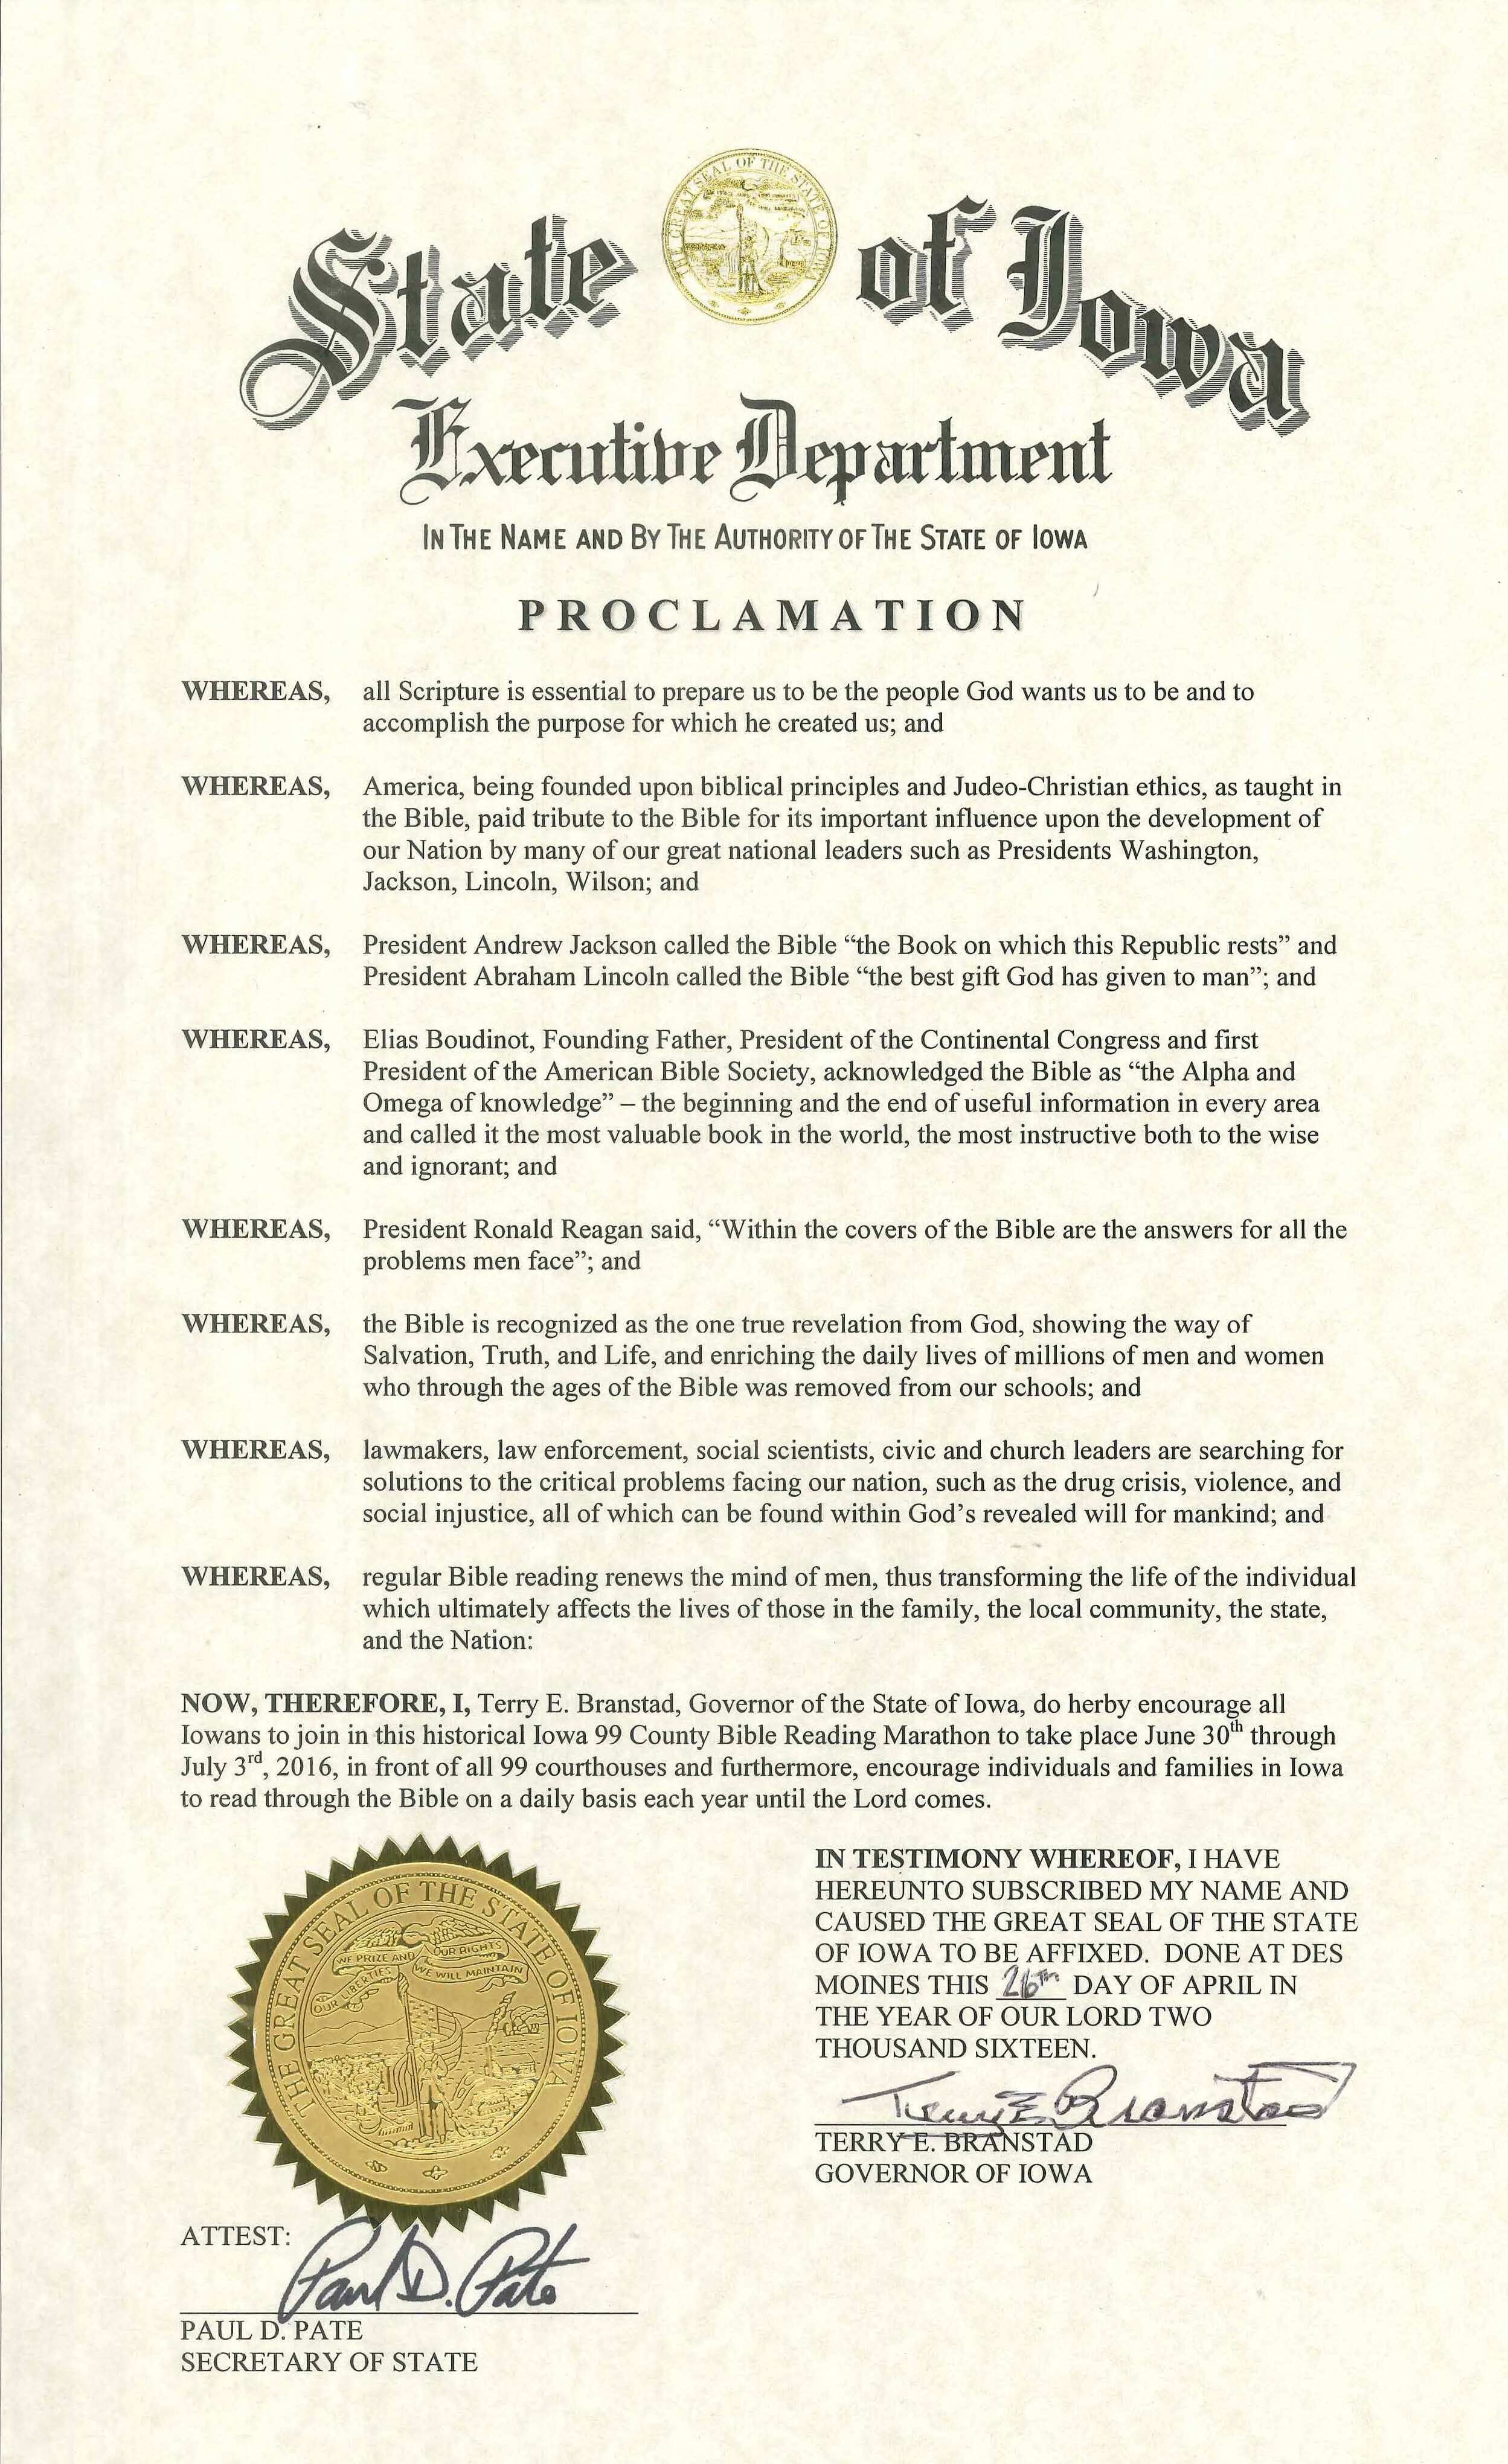 Gov. Branstad signed the 99 County Bible Reading Marathon Proclamation in April.